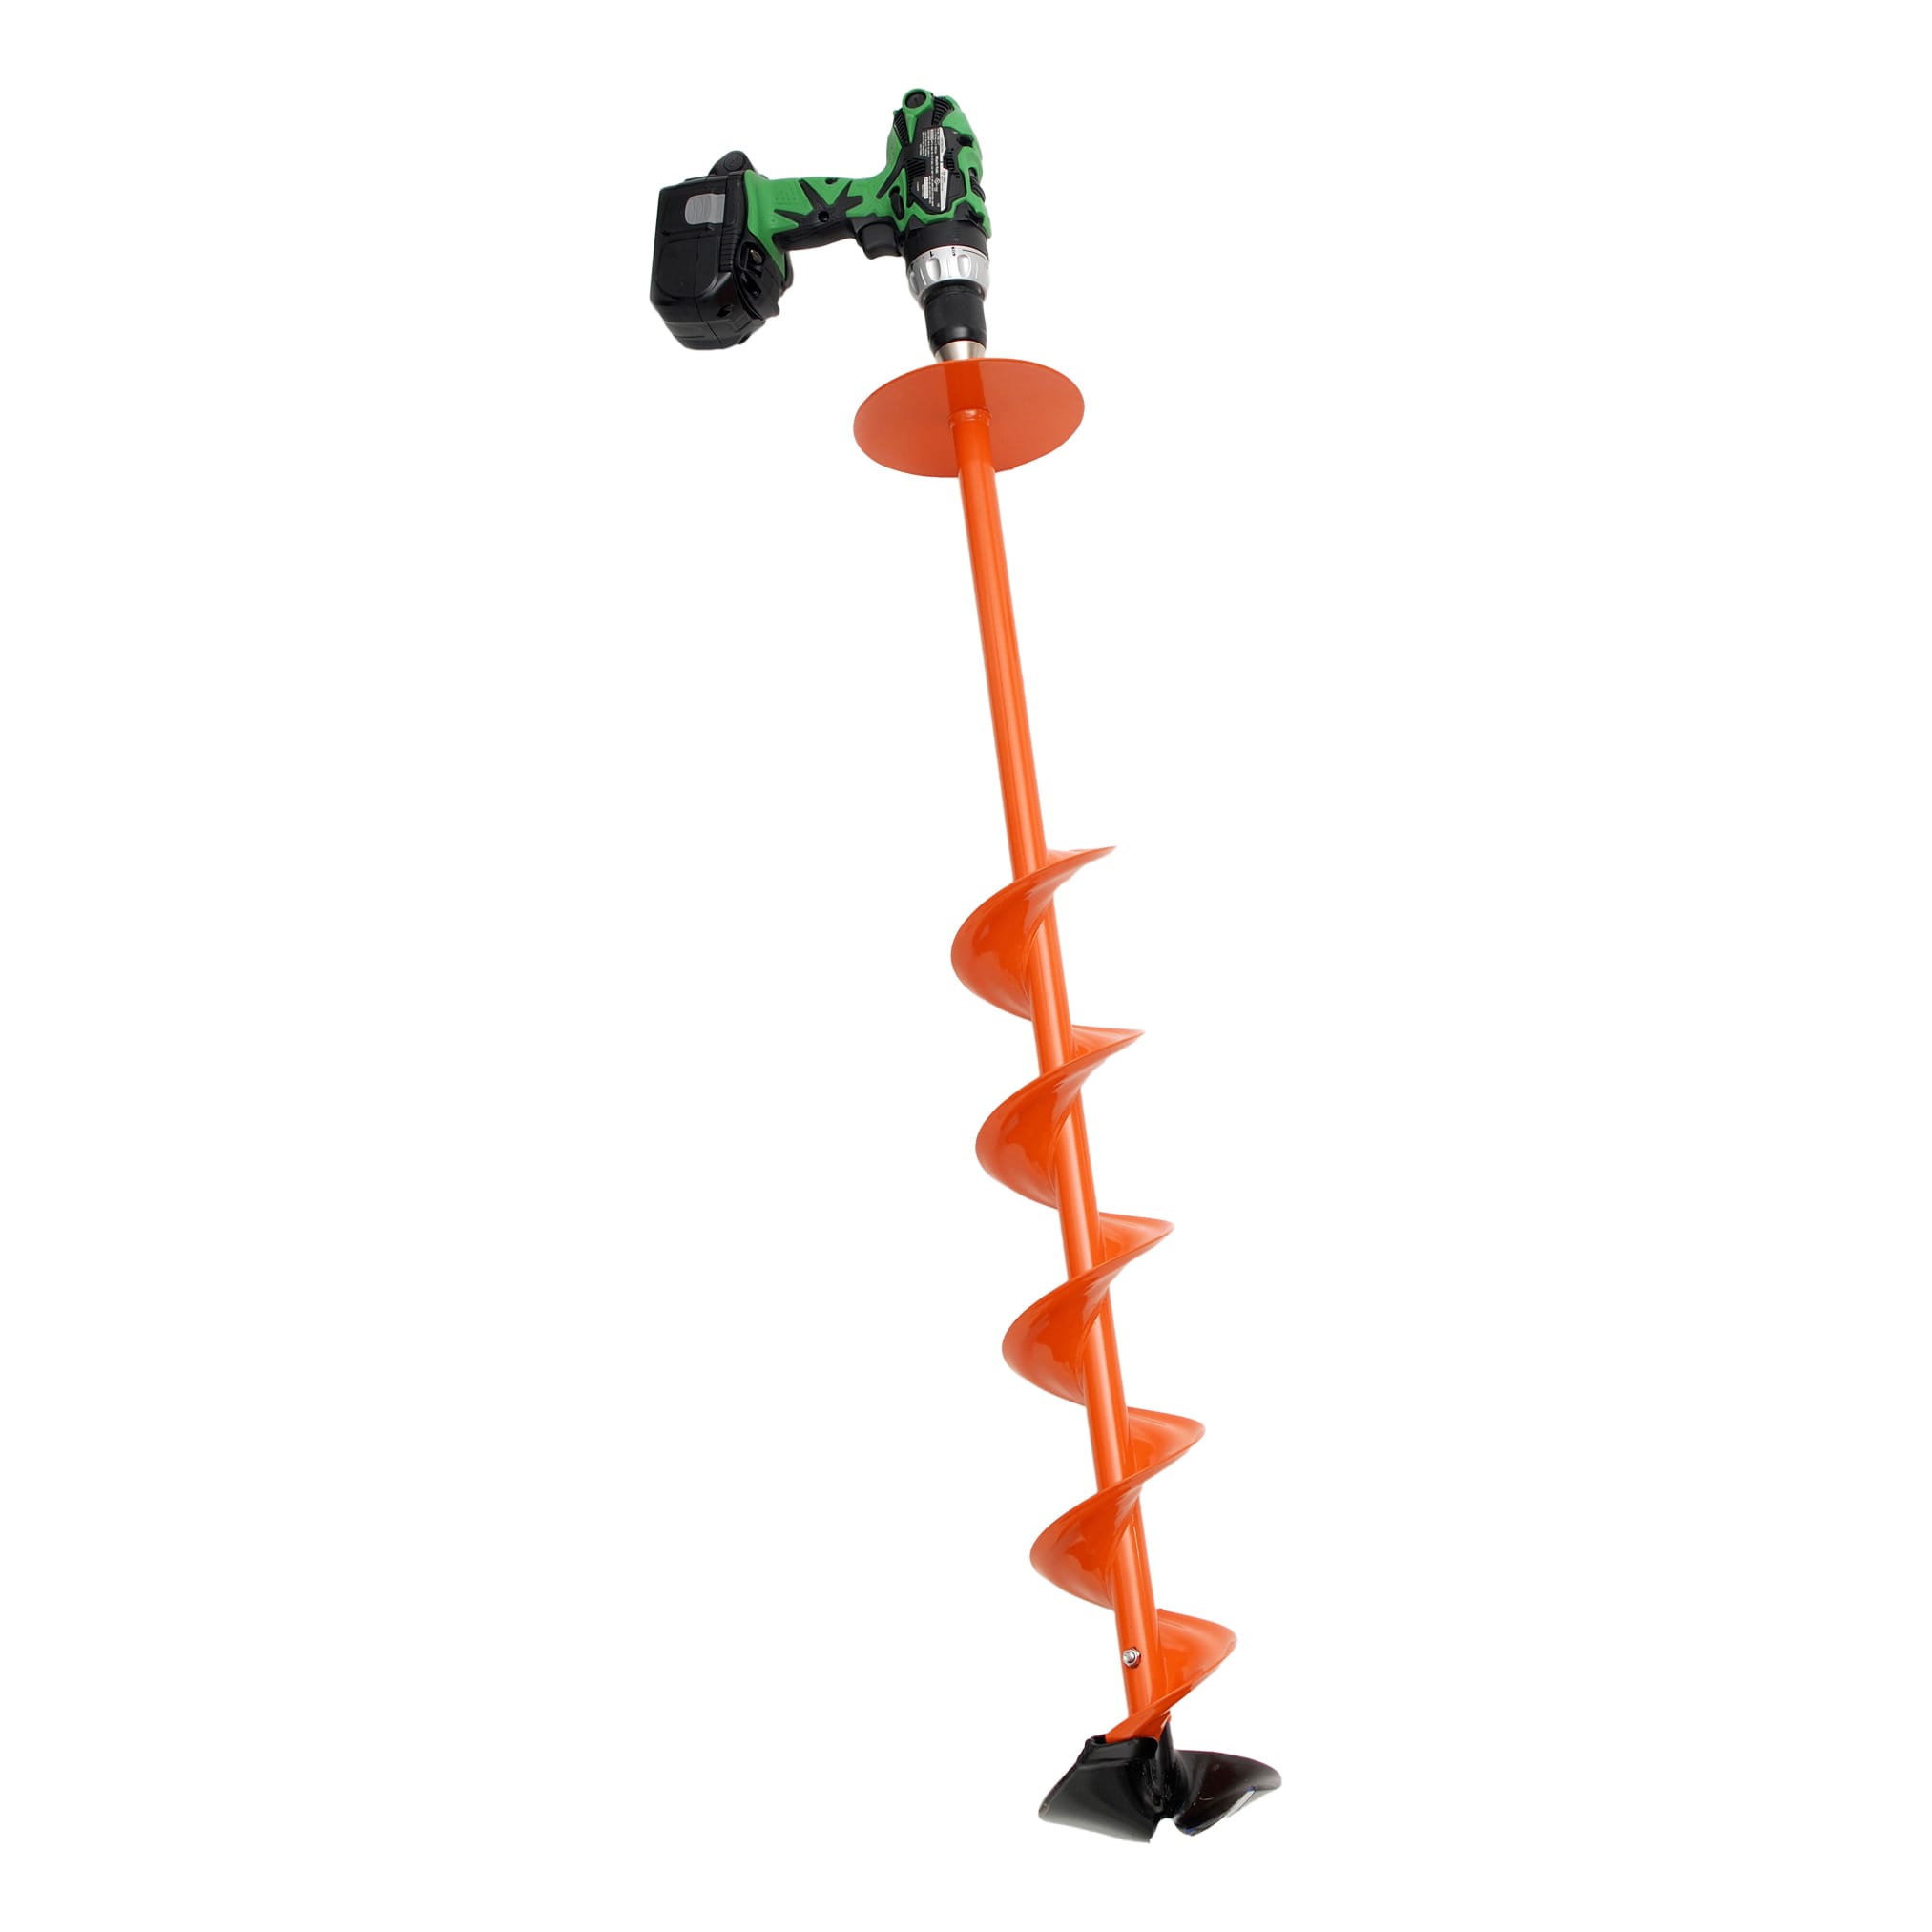 Nils USA Cordless Drill Auger